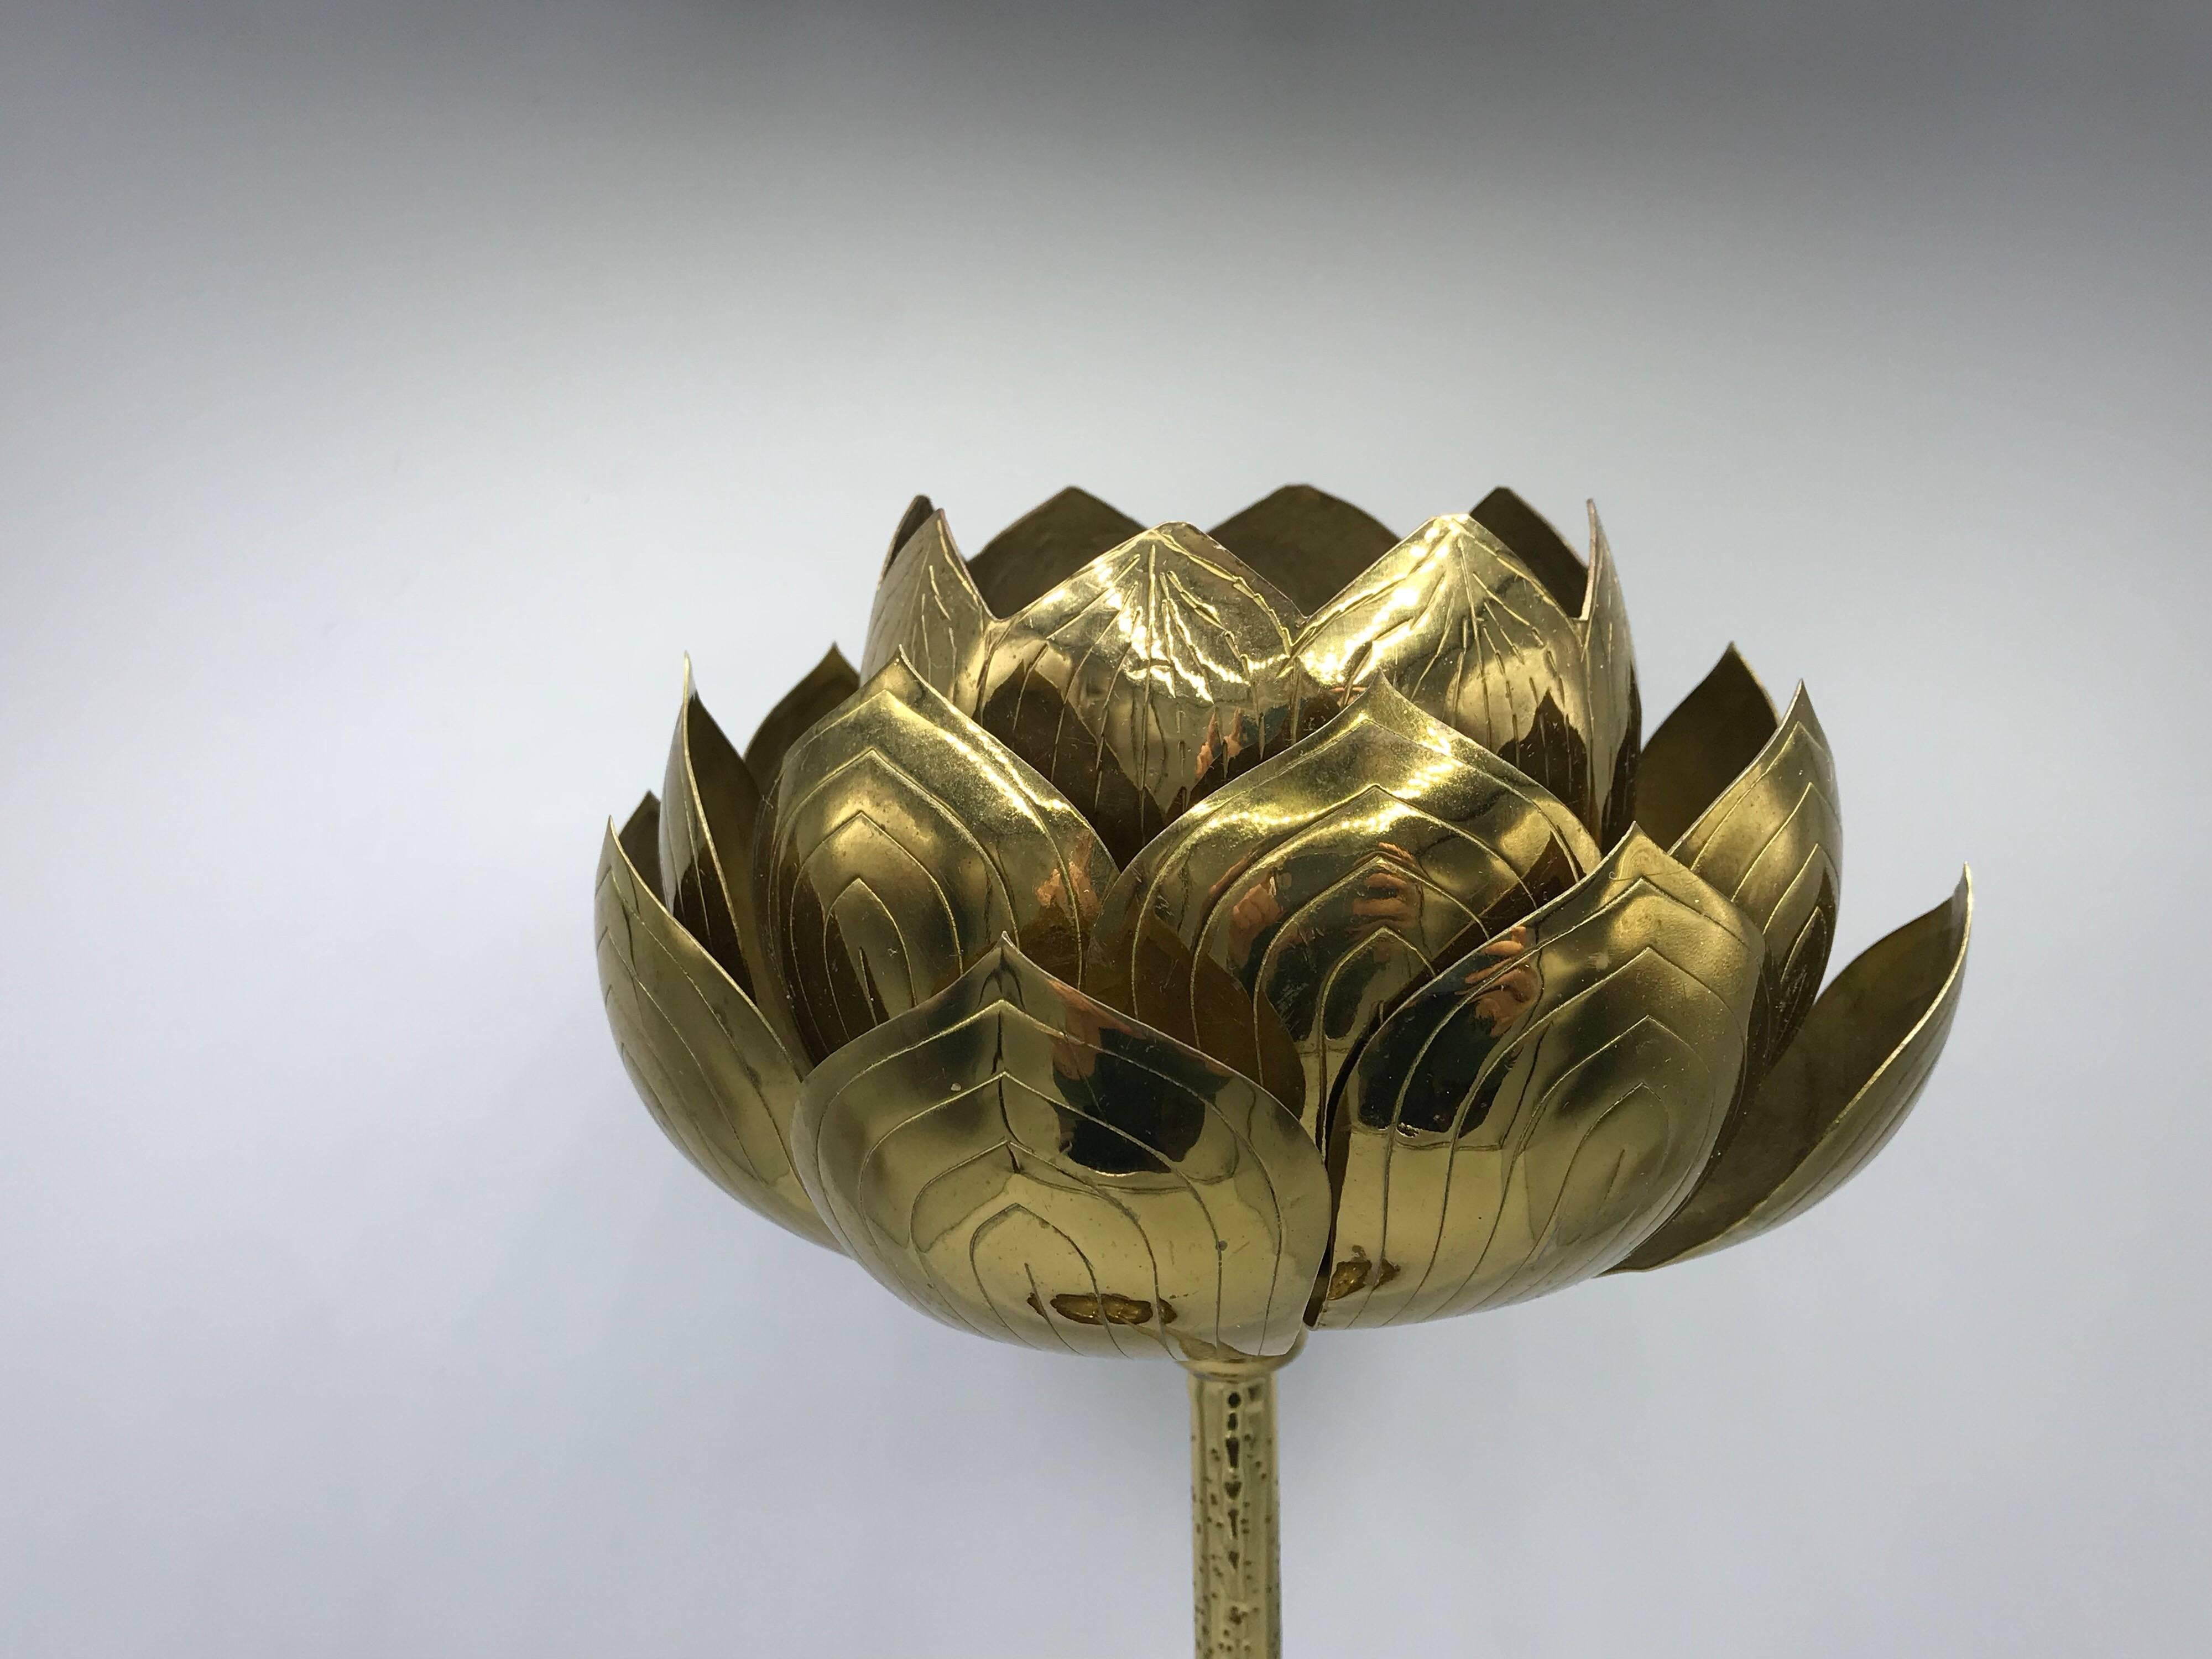 Offered is a glamorous, 1970s brass lotus sculpture candle holder. Beautiful detailing and such a statement piece! Would make a perfect ashtray as well.